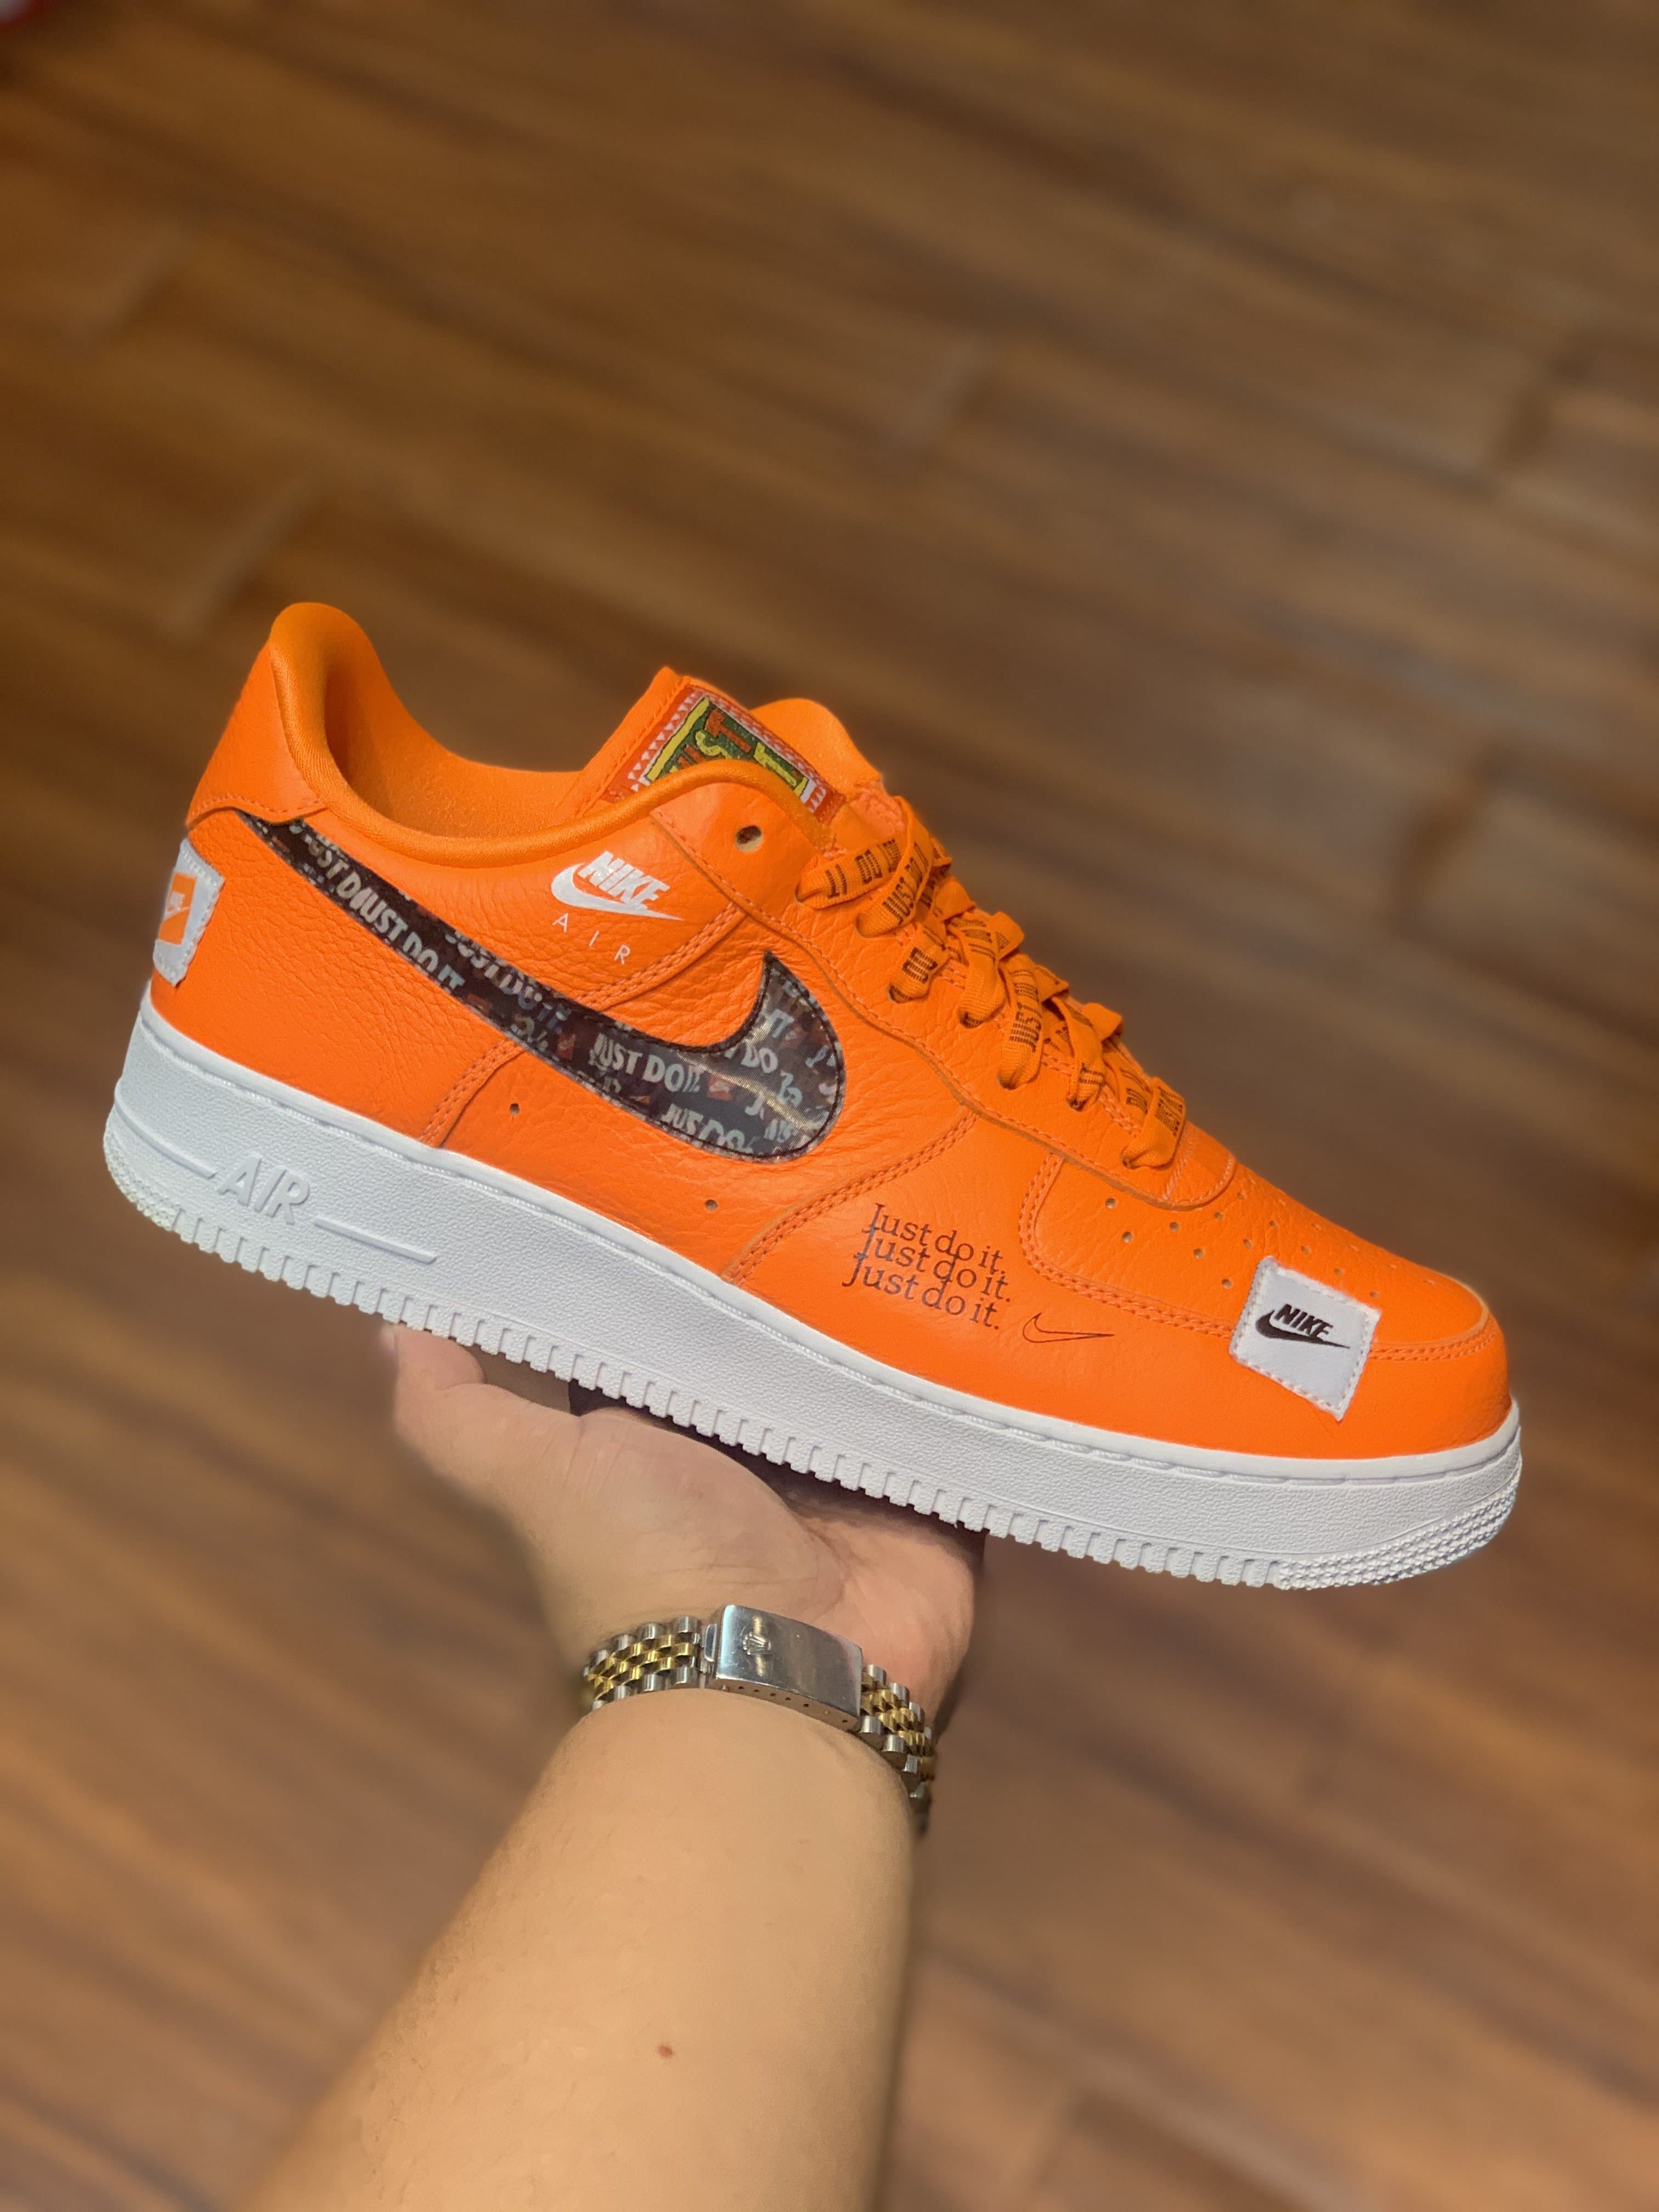 Nike Air Force 1 Low “Just Do It Pack Total Orange”